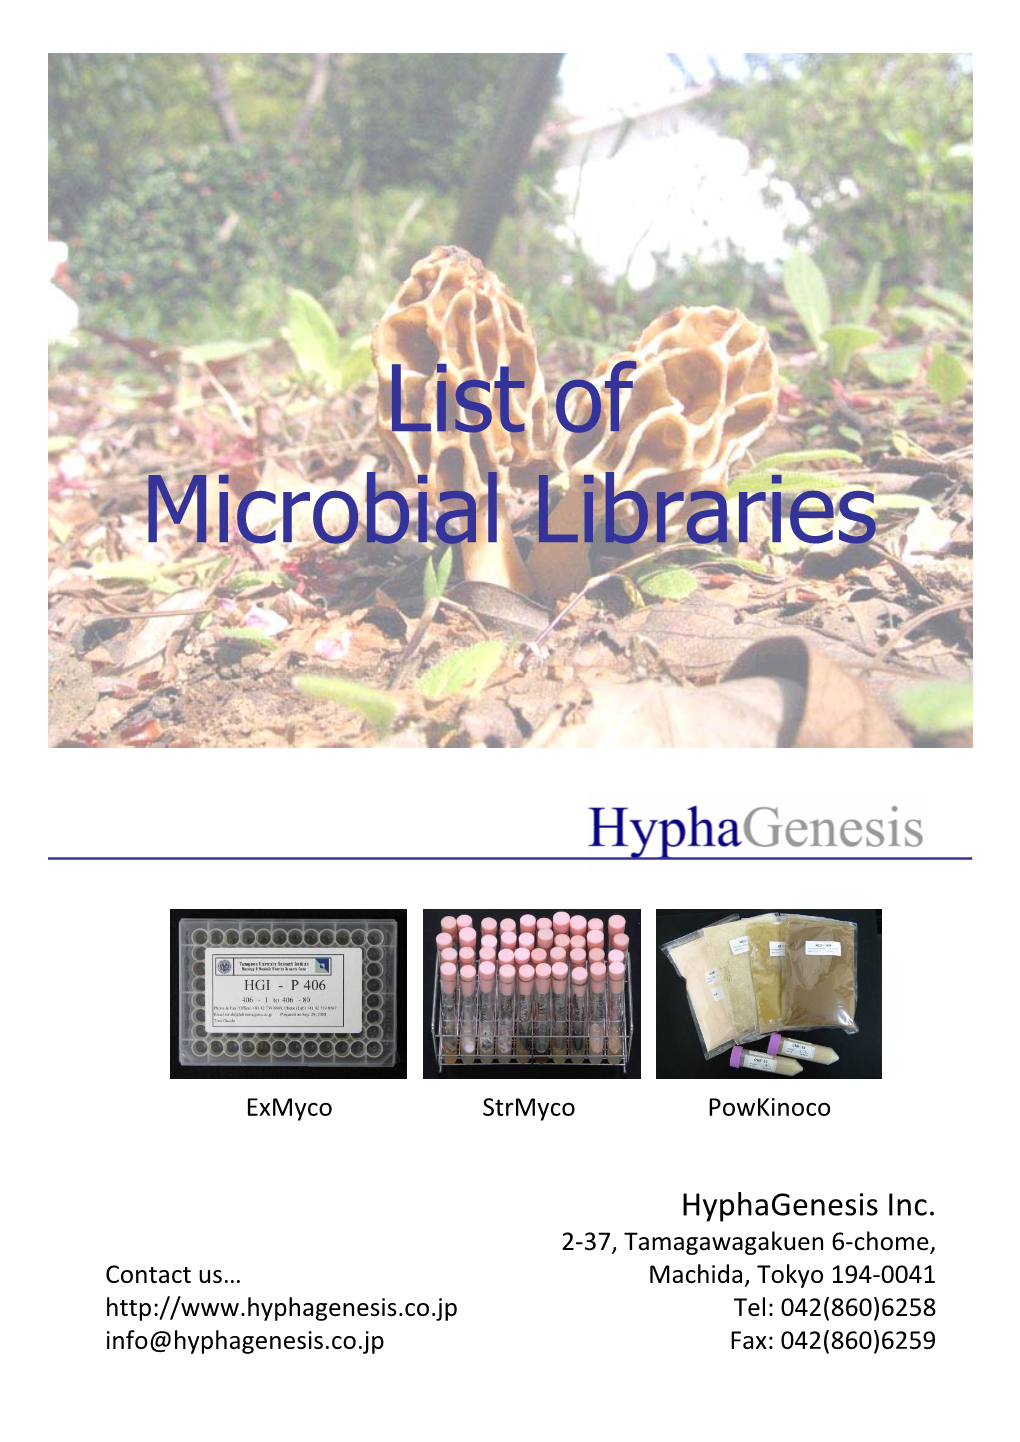 List of Microbial Libraries